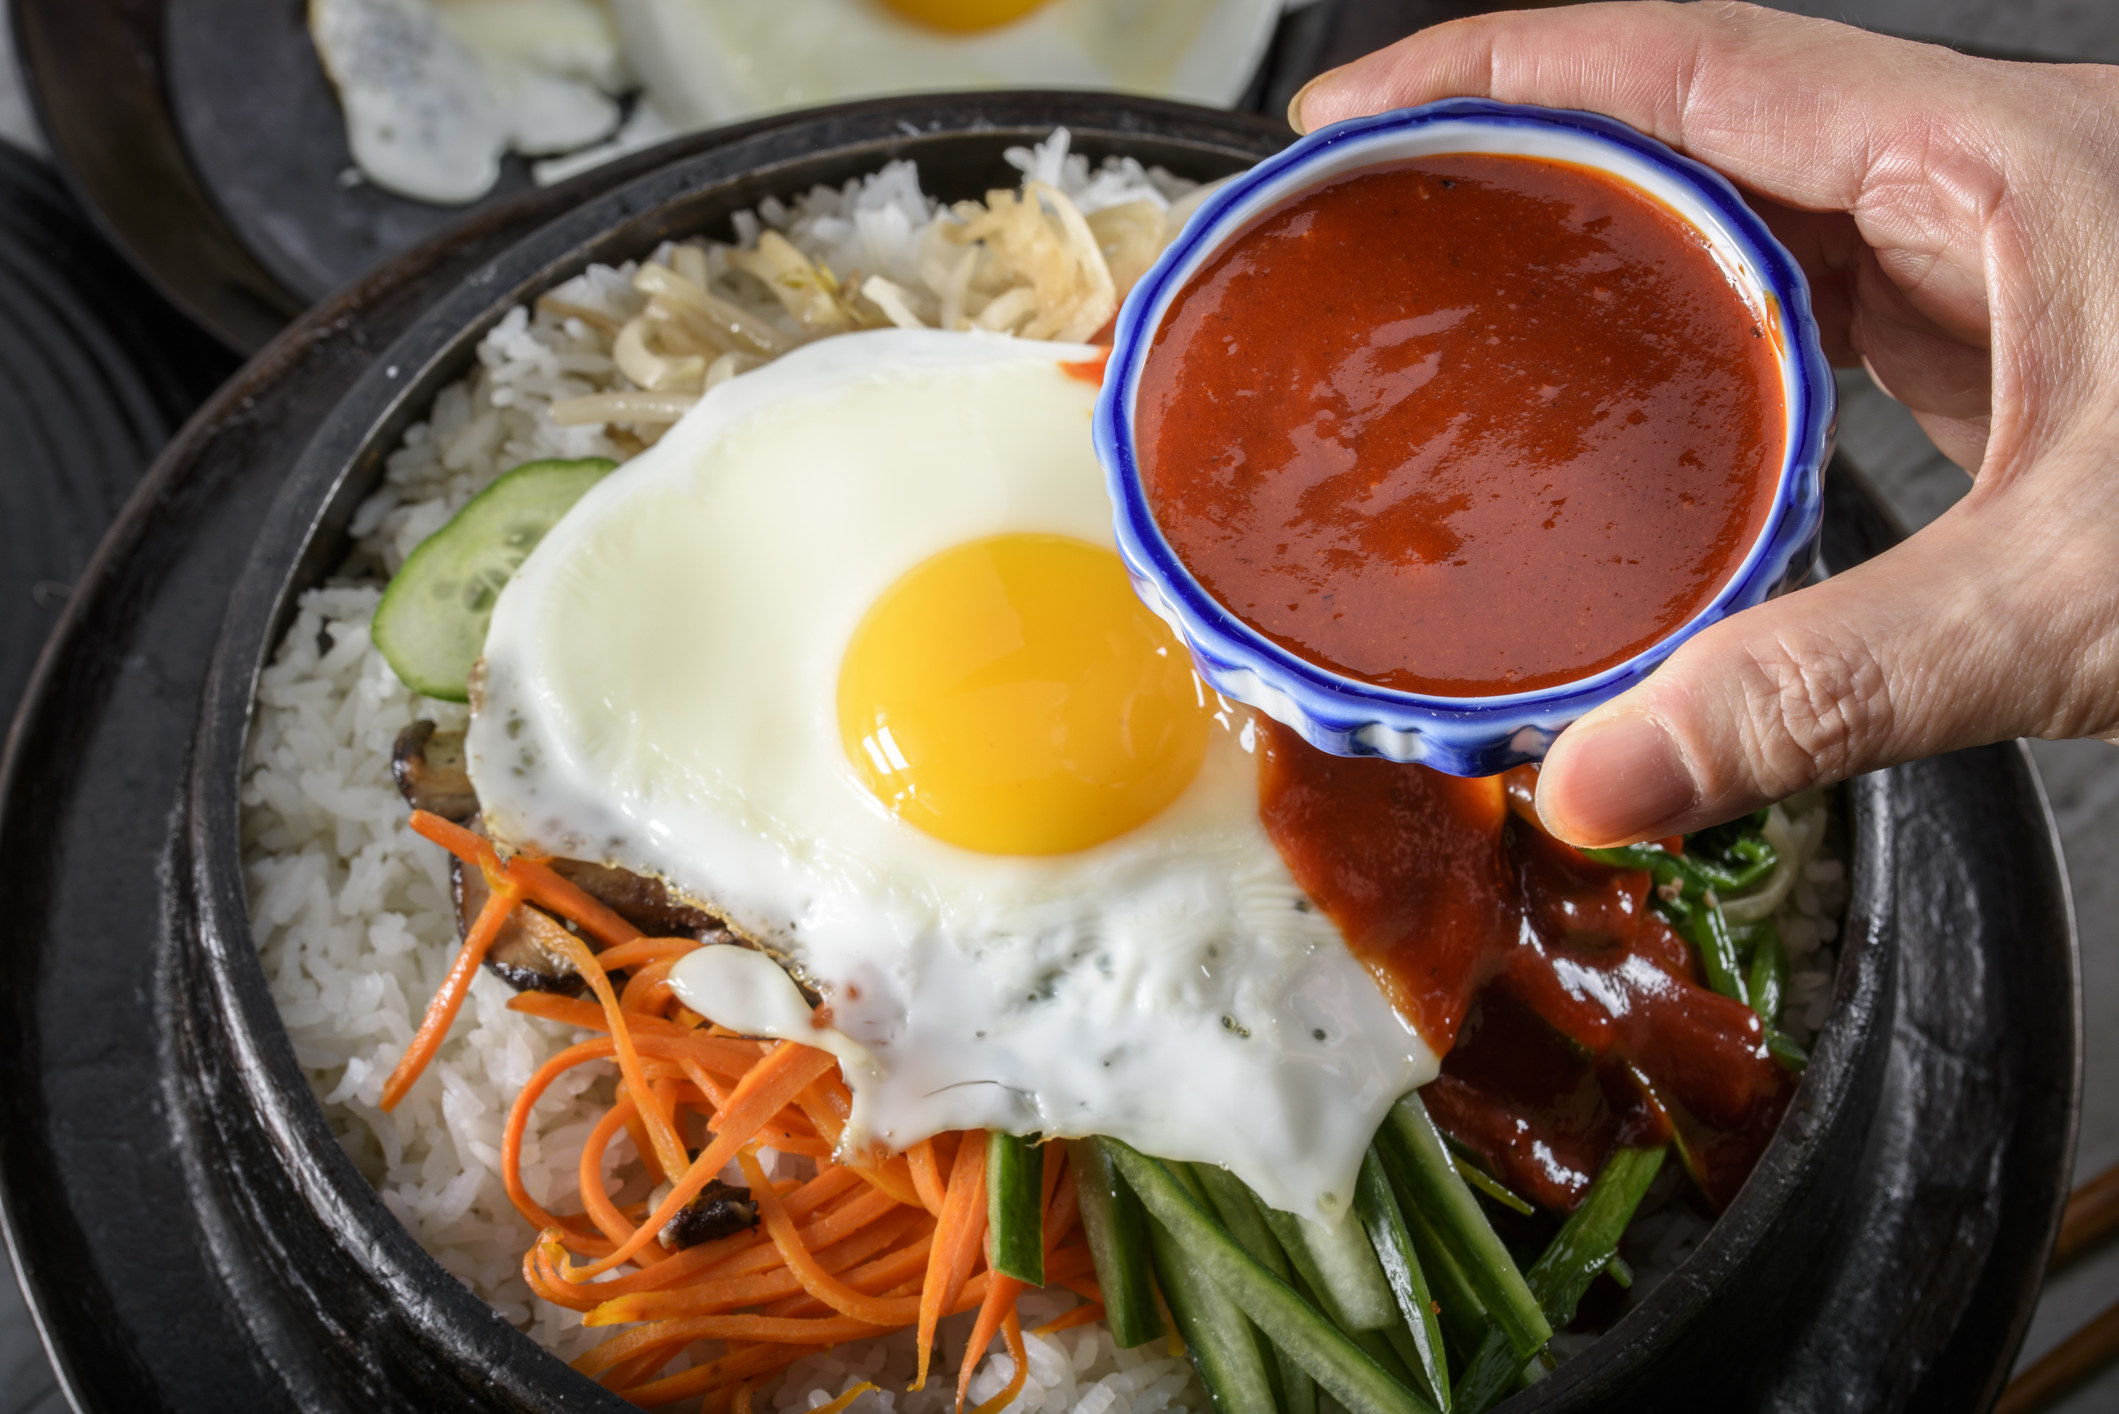 Korean bibimbap — including rice, carrots, other vegetables, a fried egg, and gochujang added to it